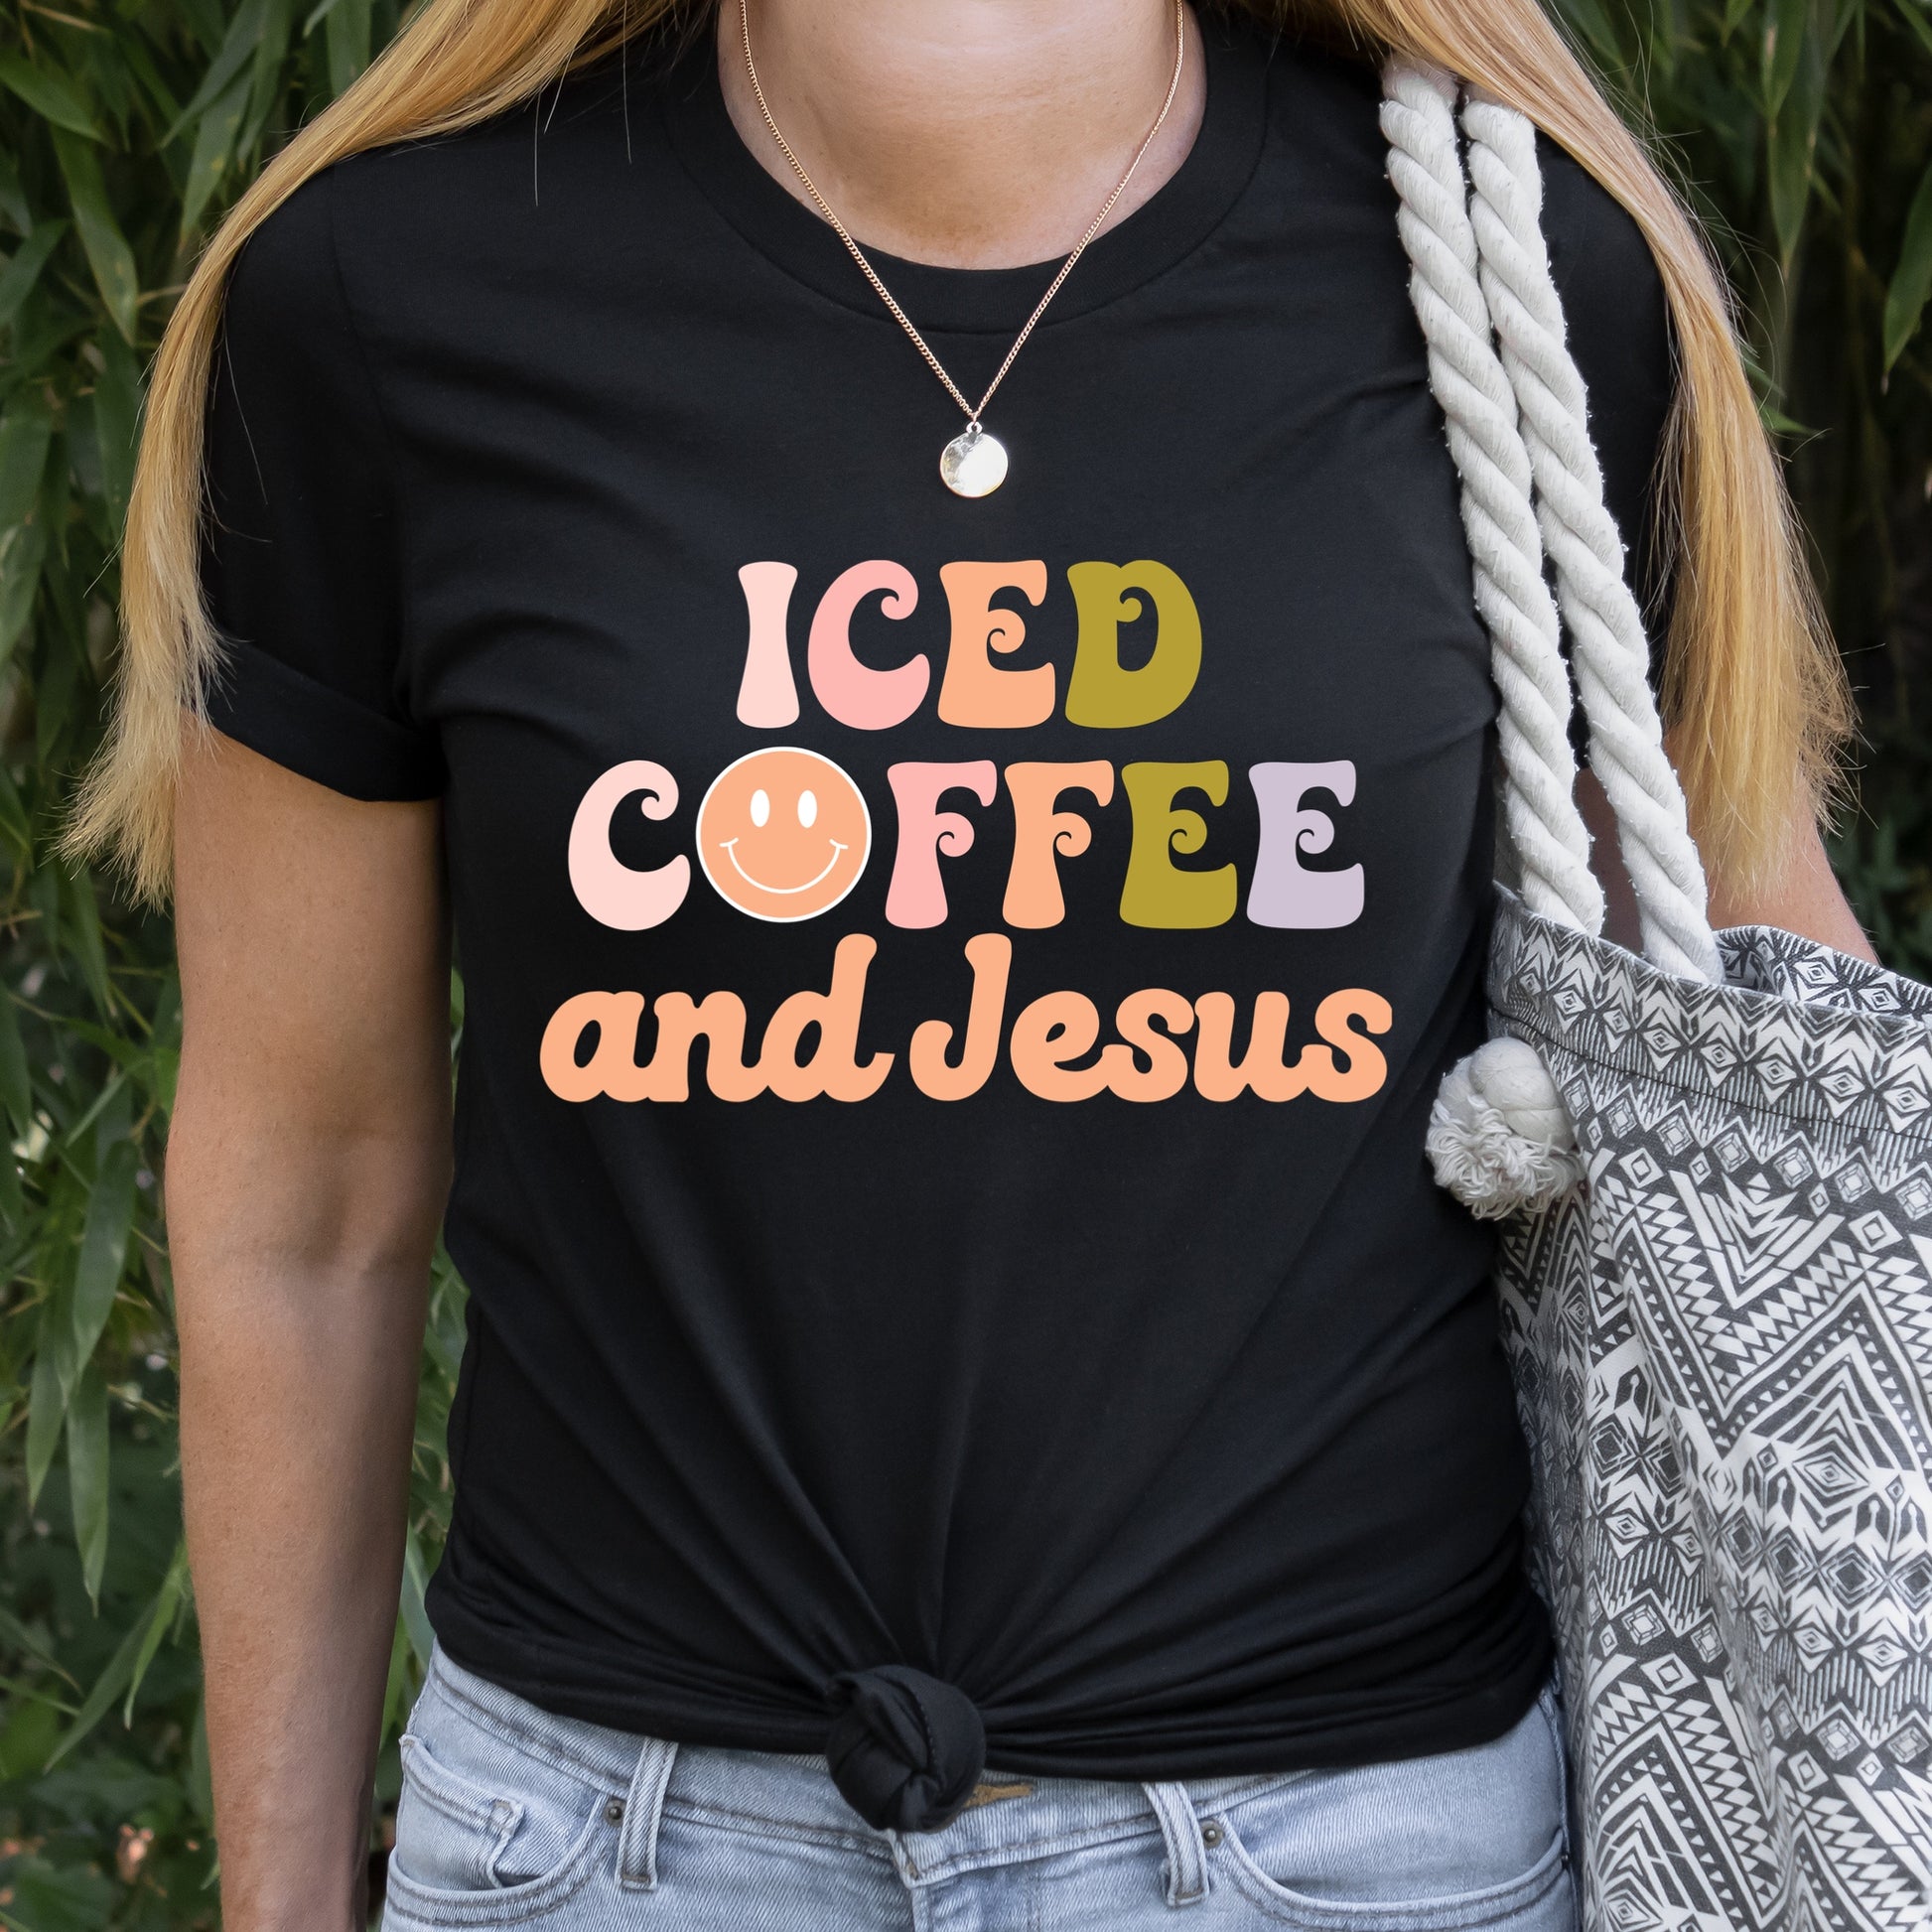 Black T Shirt with a graphic iron-on that says "Iced Coffee and Jesus" Iron Transfers 